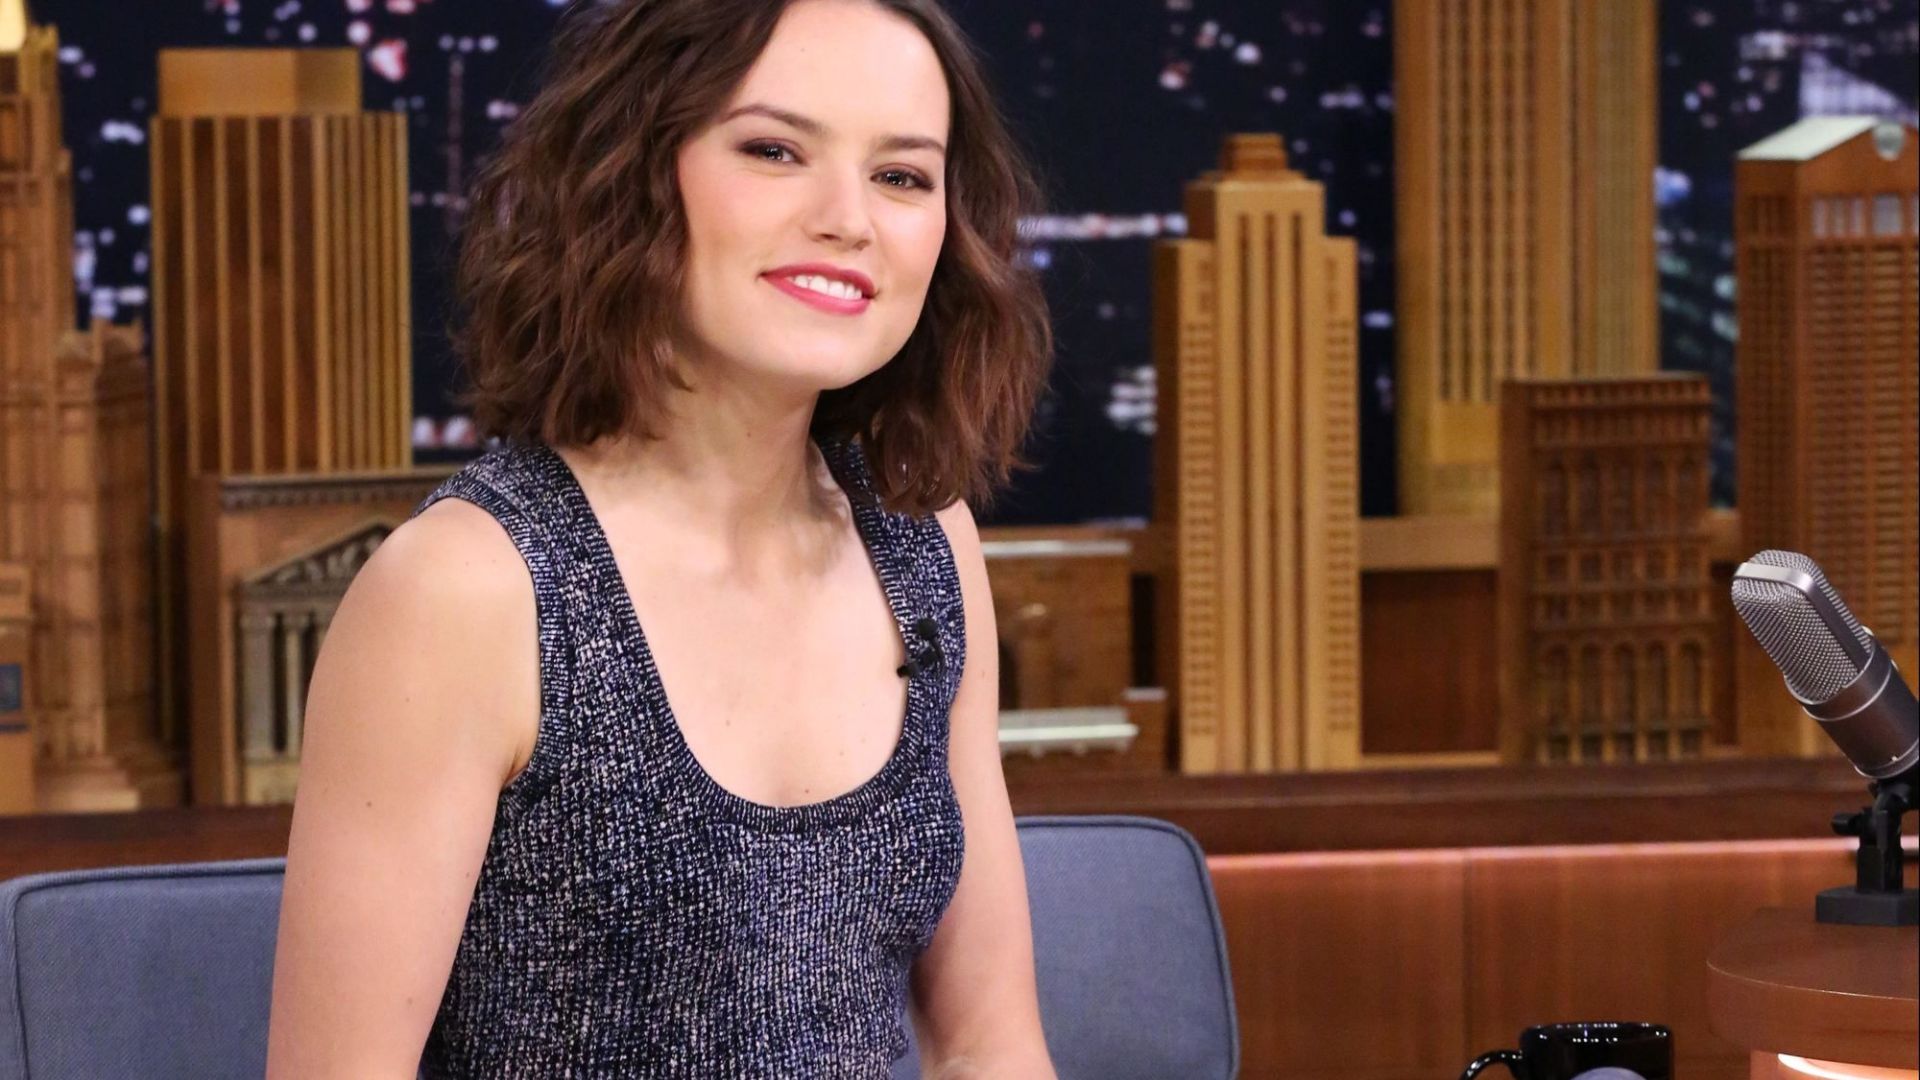 Wallpaper Daisy Ridley as guest in TV show